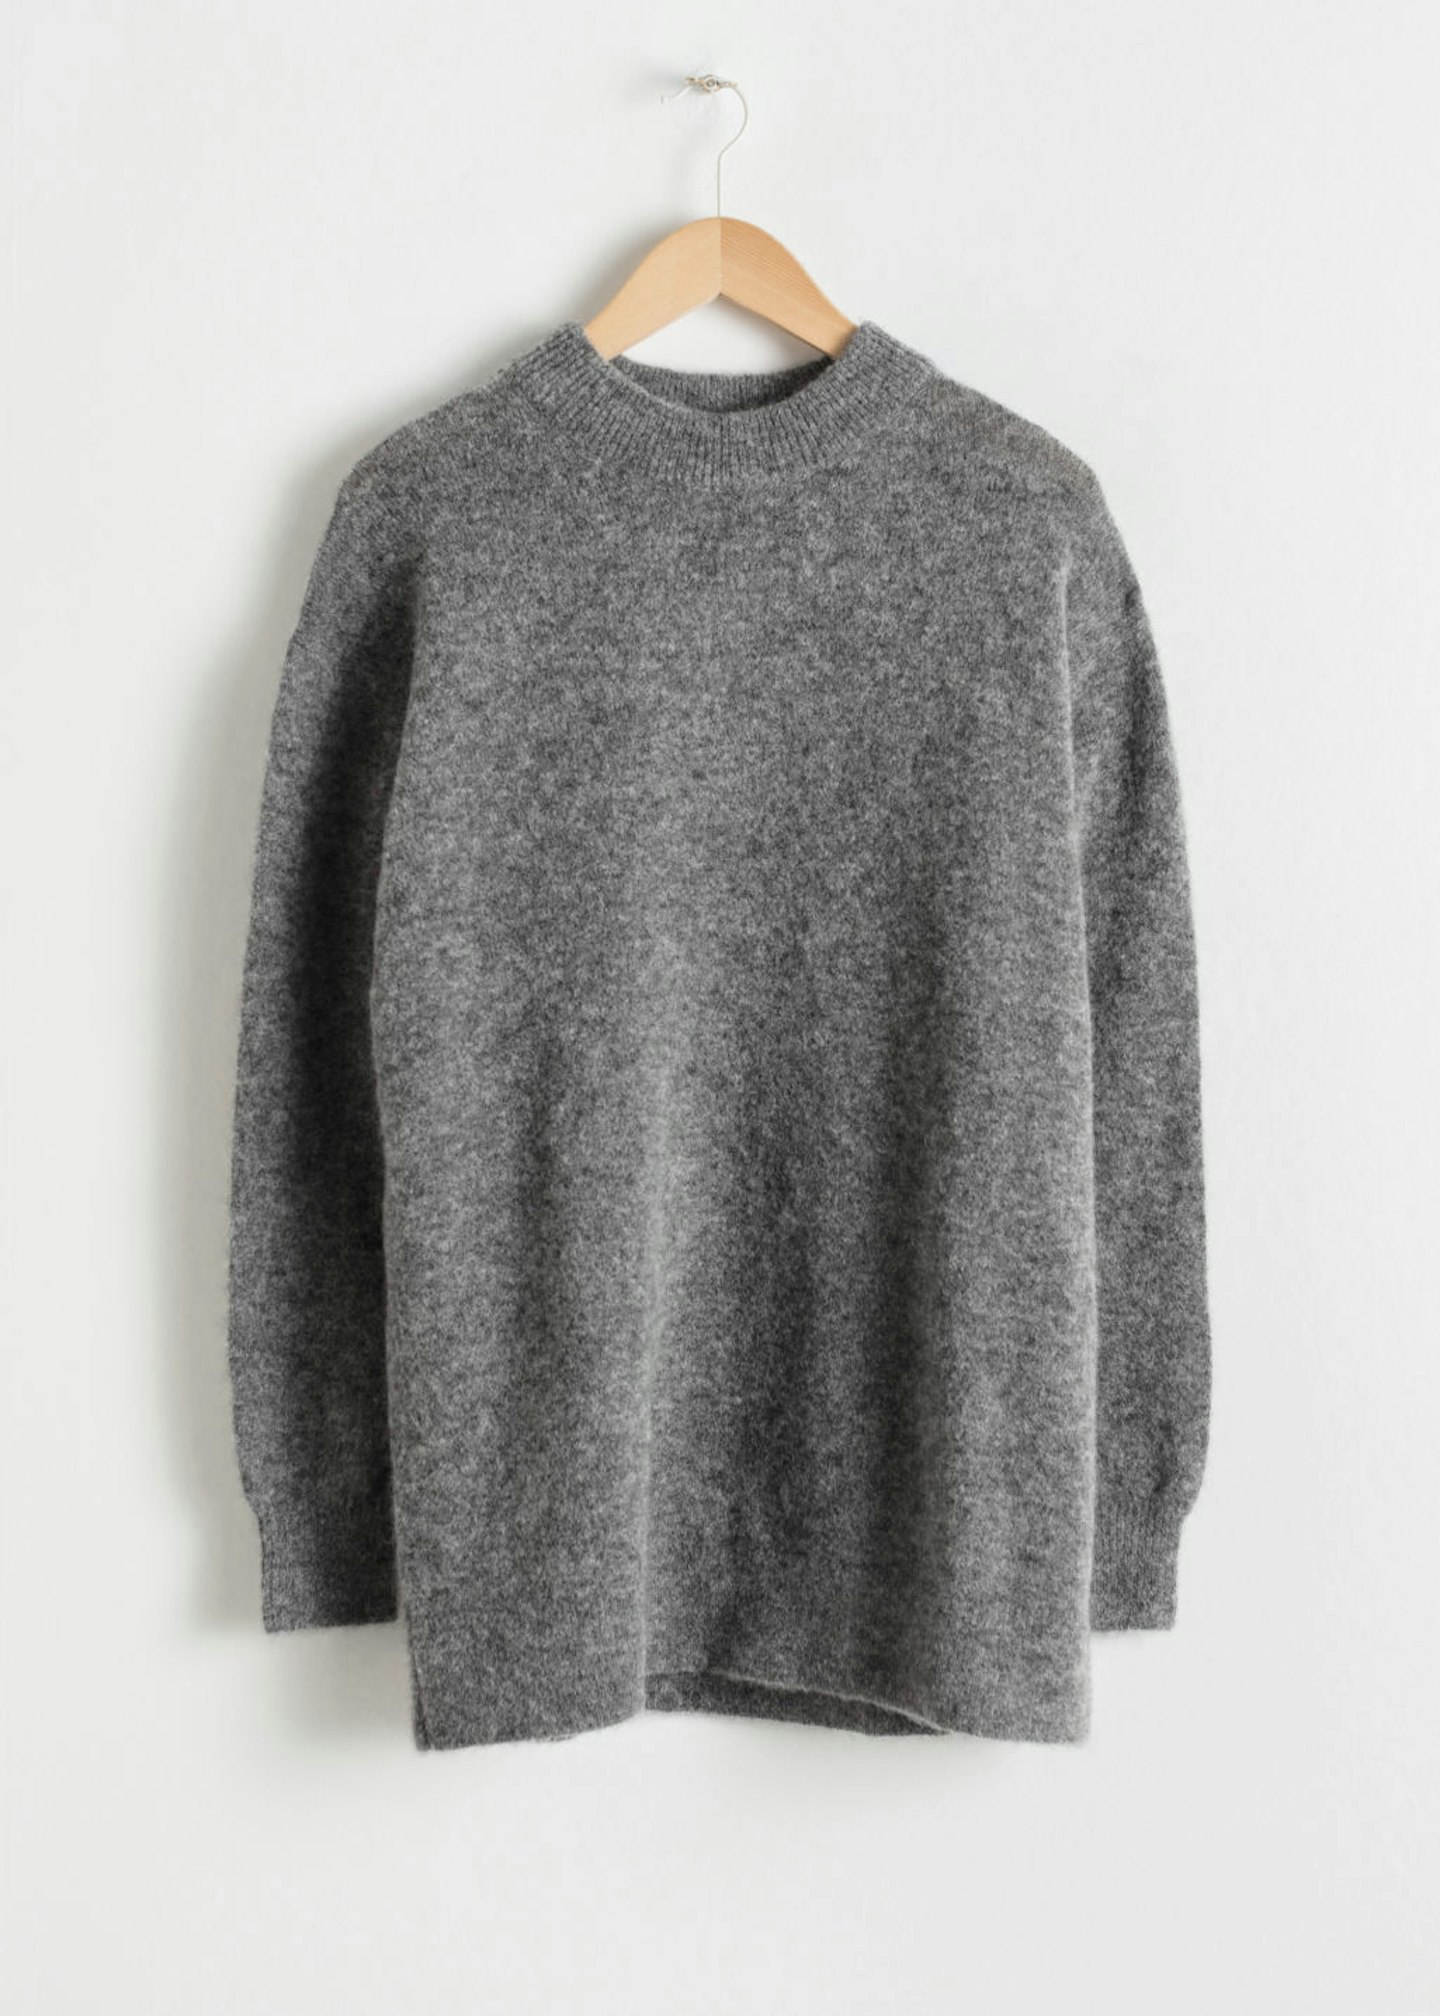 & Other Stories, Oversized Wool Blend Sweater, £69